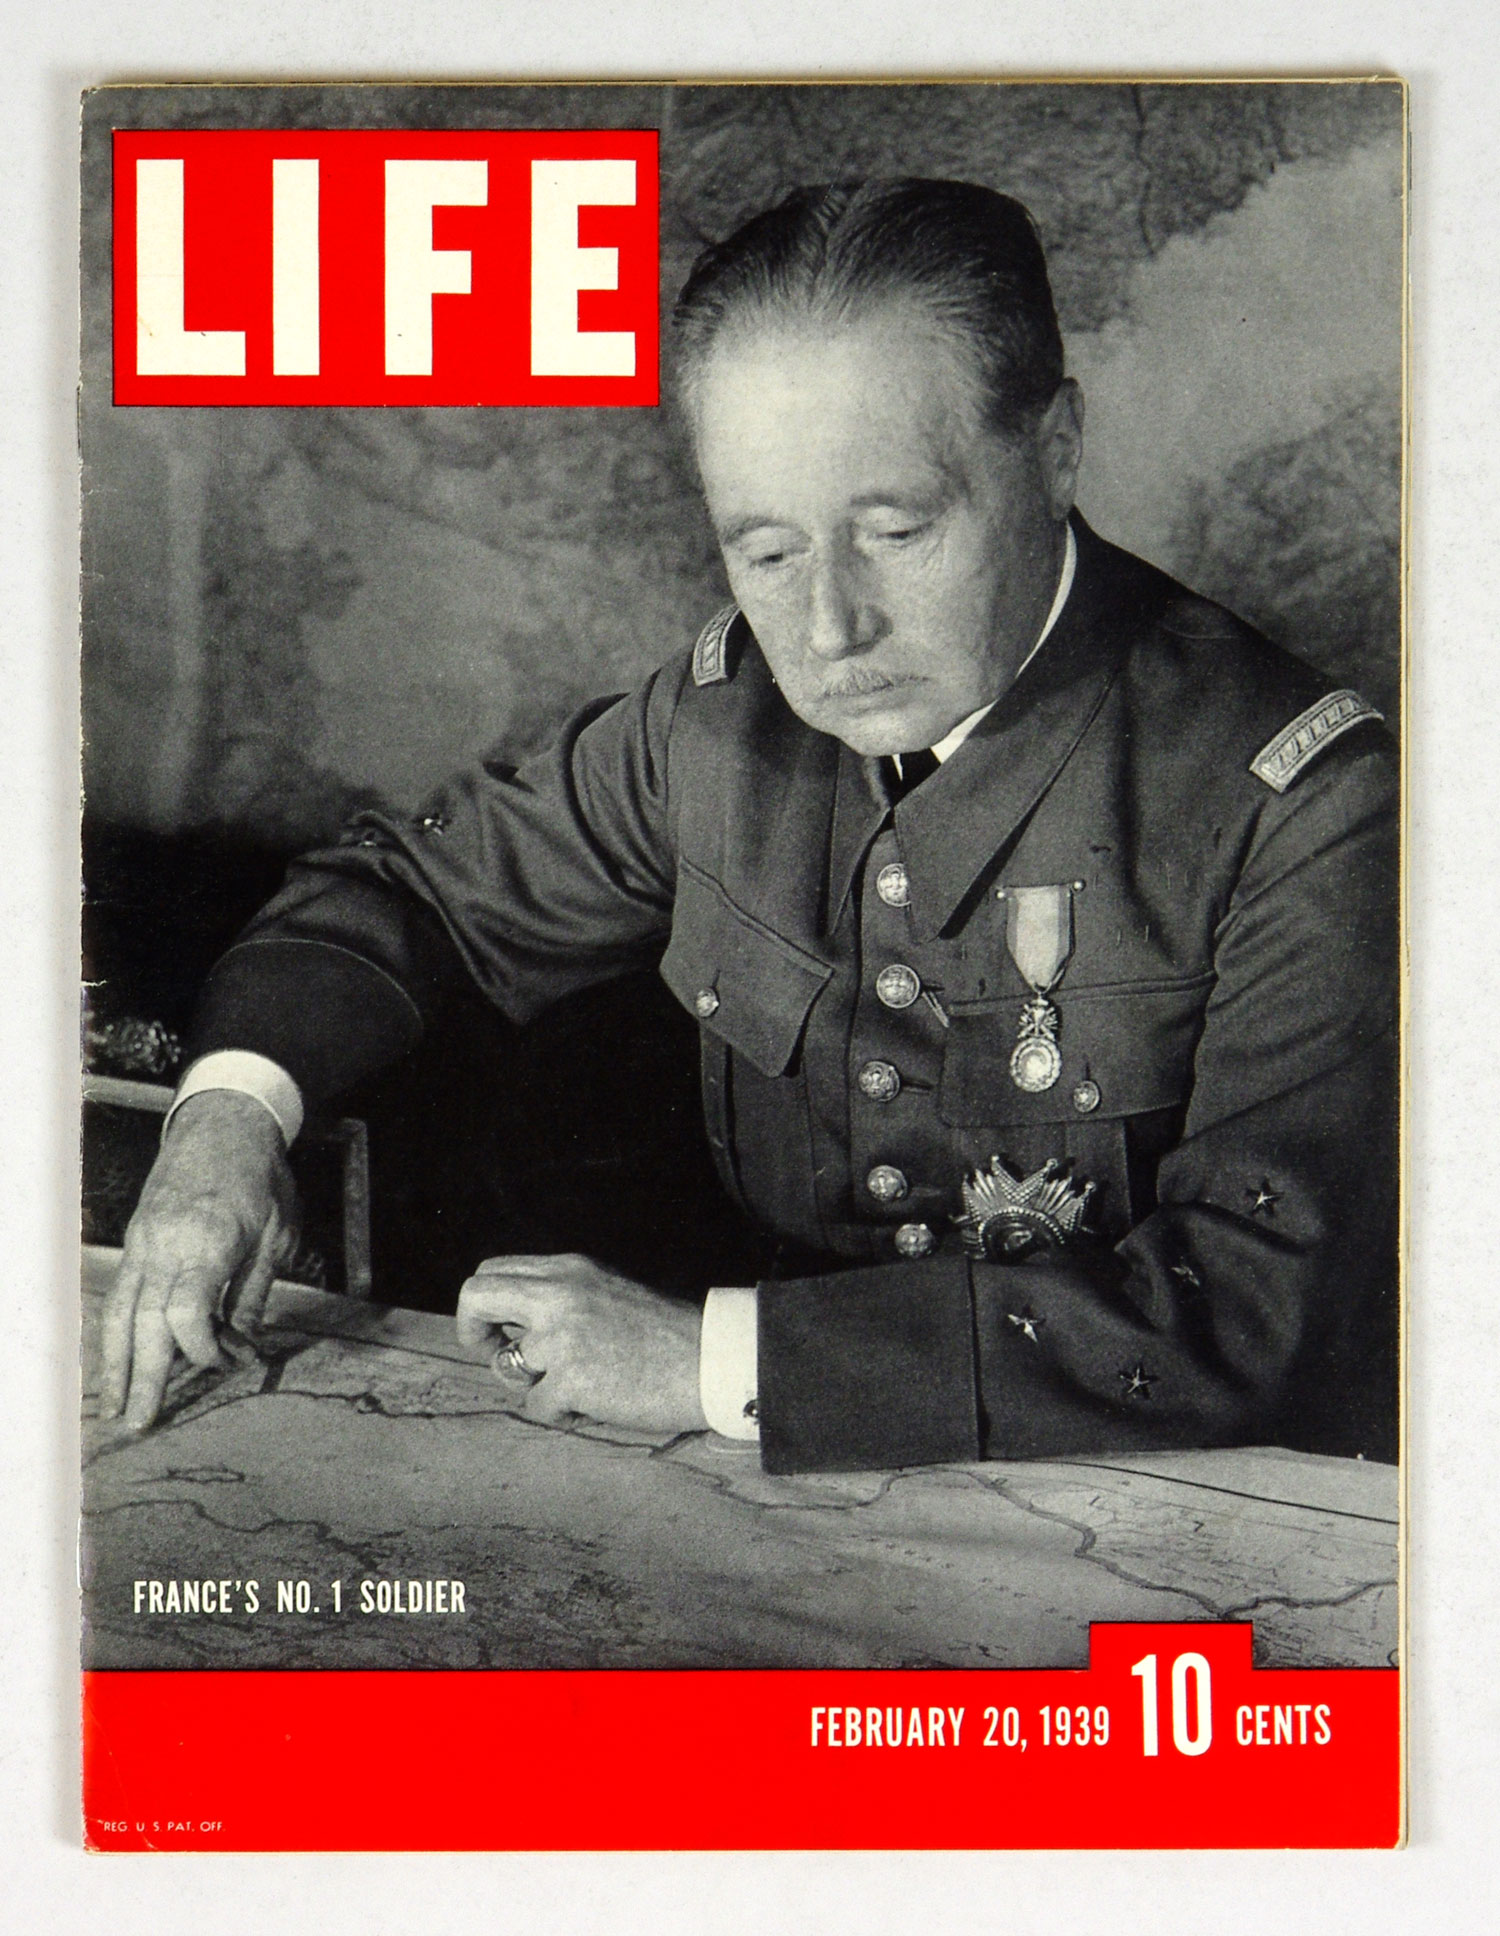 LIFE Magazine Back Issue 1939 February 20 France's No. 1 Soldier